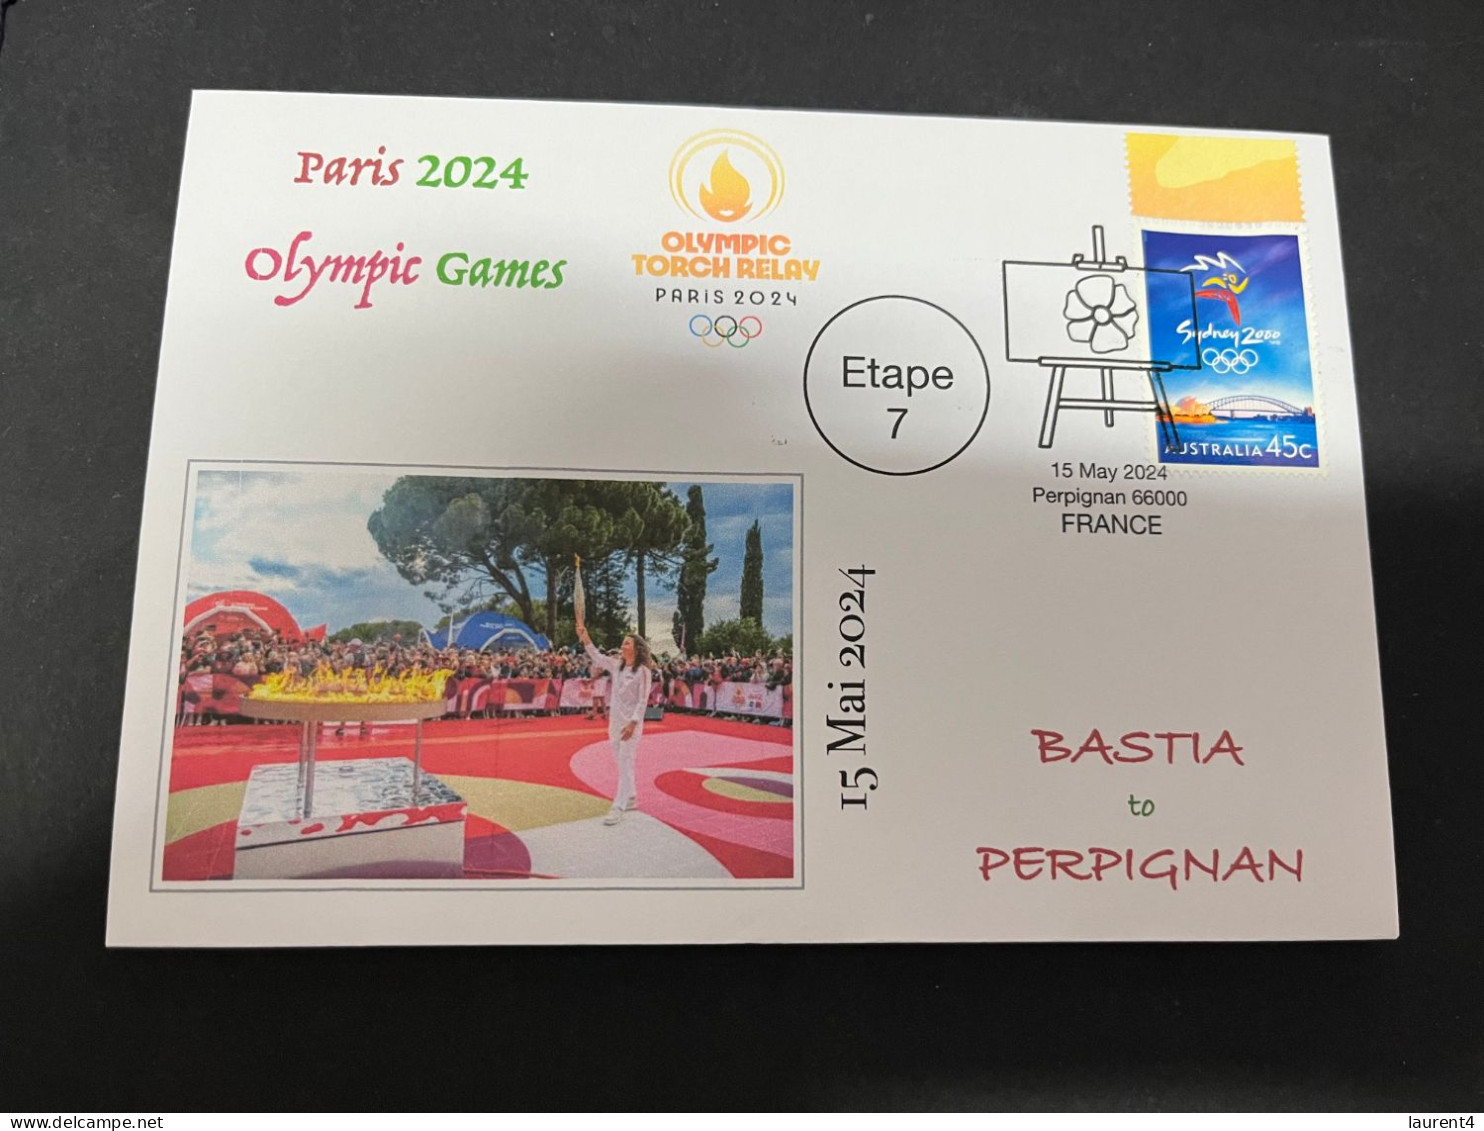 16-5-2024 (5 Z 17) Paris Olympic Games 2024 - Torch Relay (Etape 7) In Perpignan (15-5-2024) With OLYMPIC Stamp - Sommer 2024: Paris